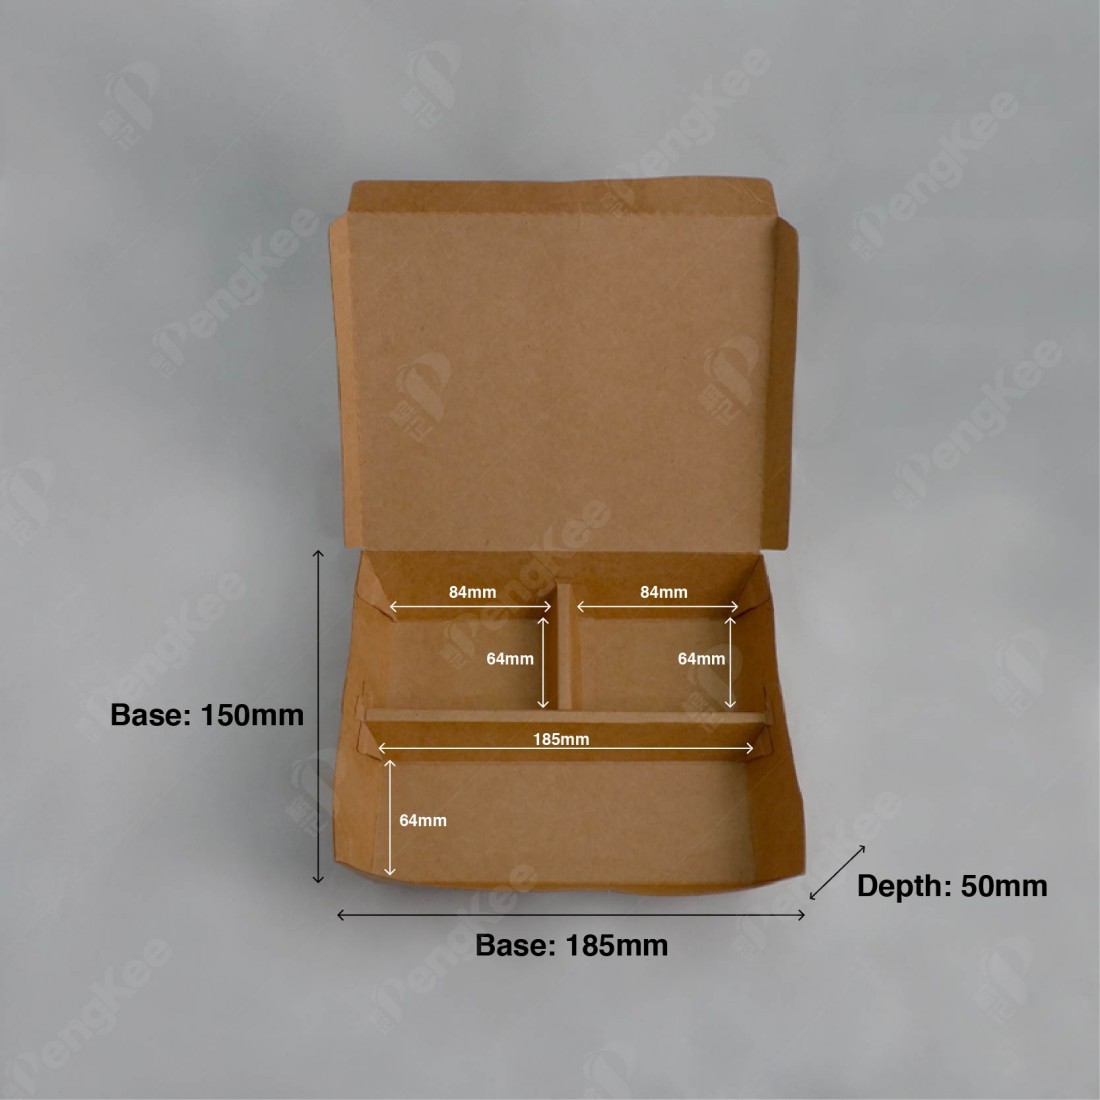 3 COMPARTMENT KRAFT PAPER  LUNCH BOX